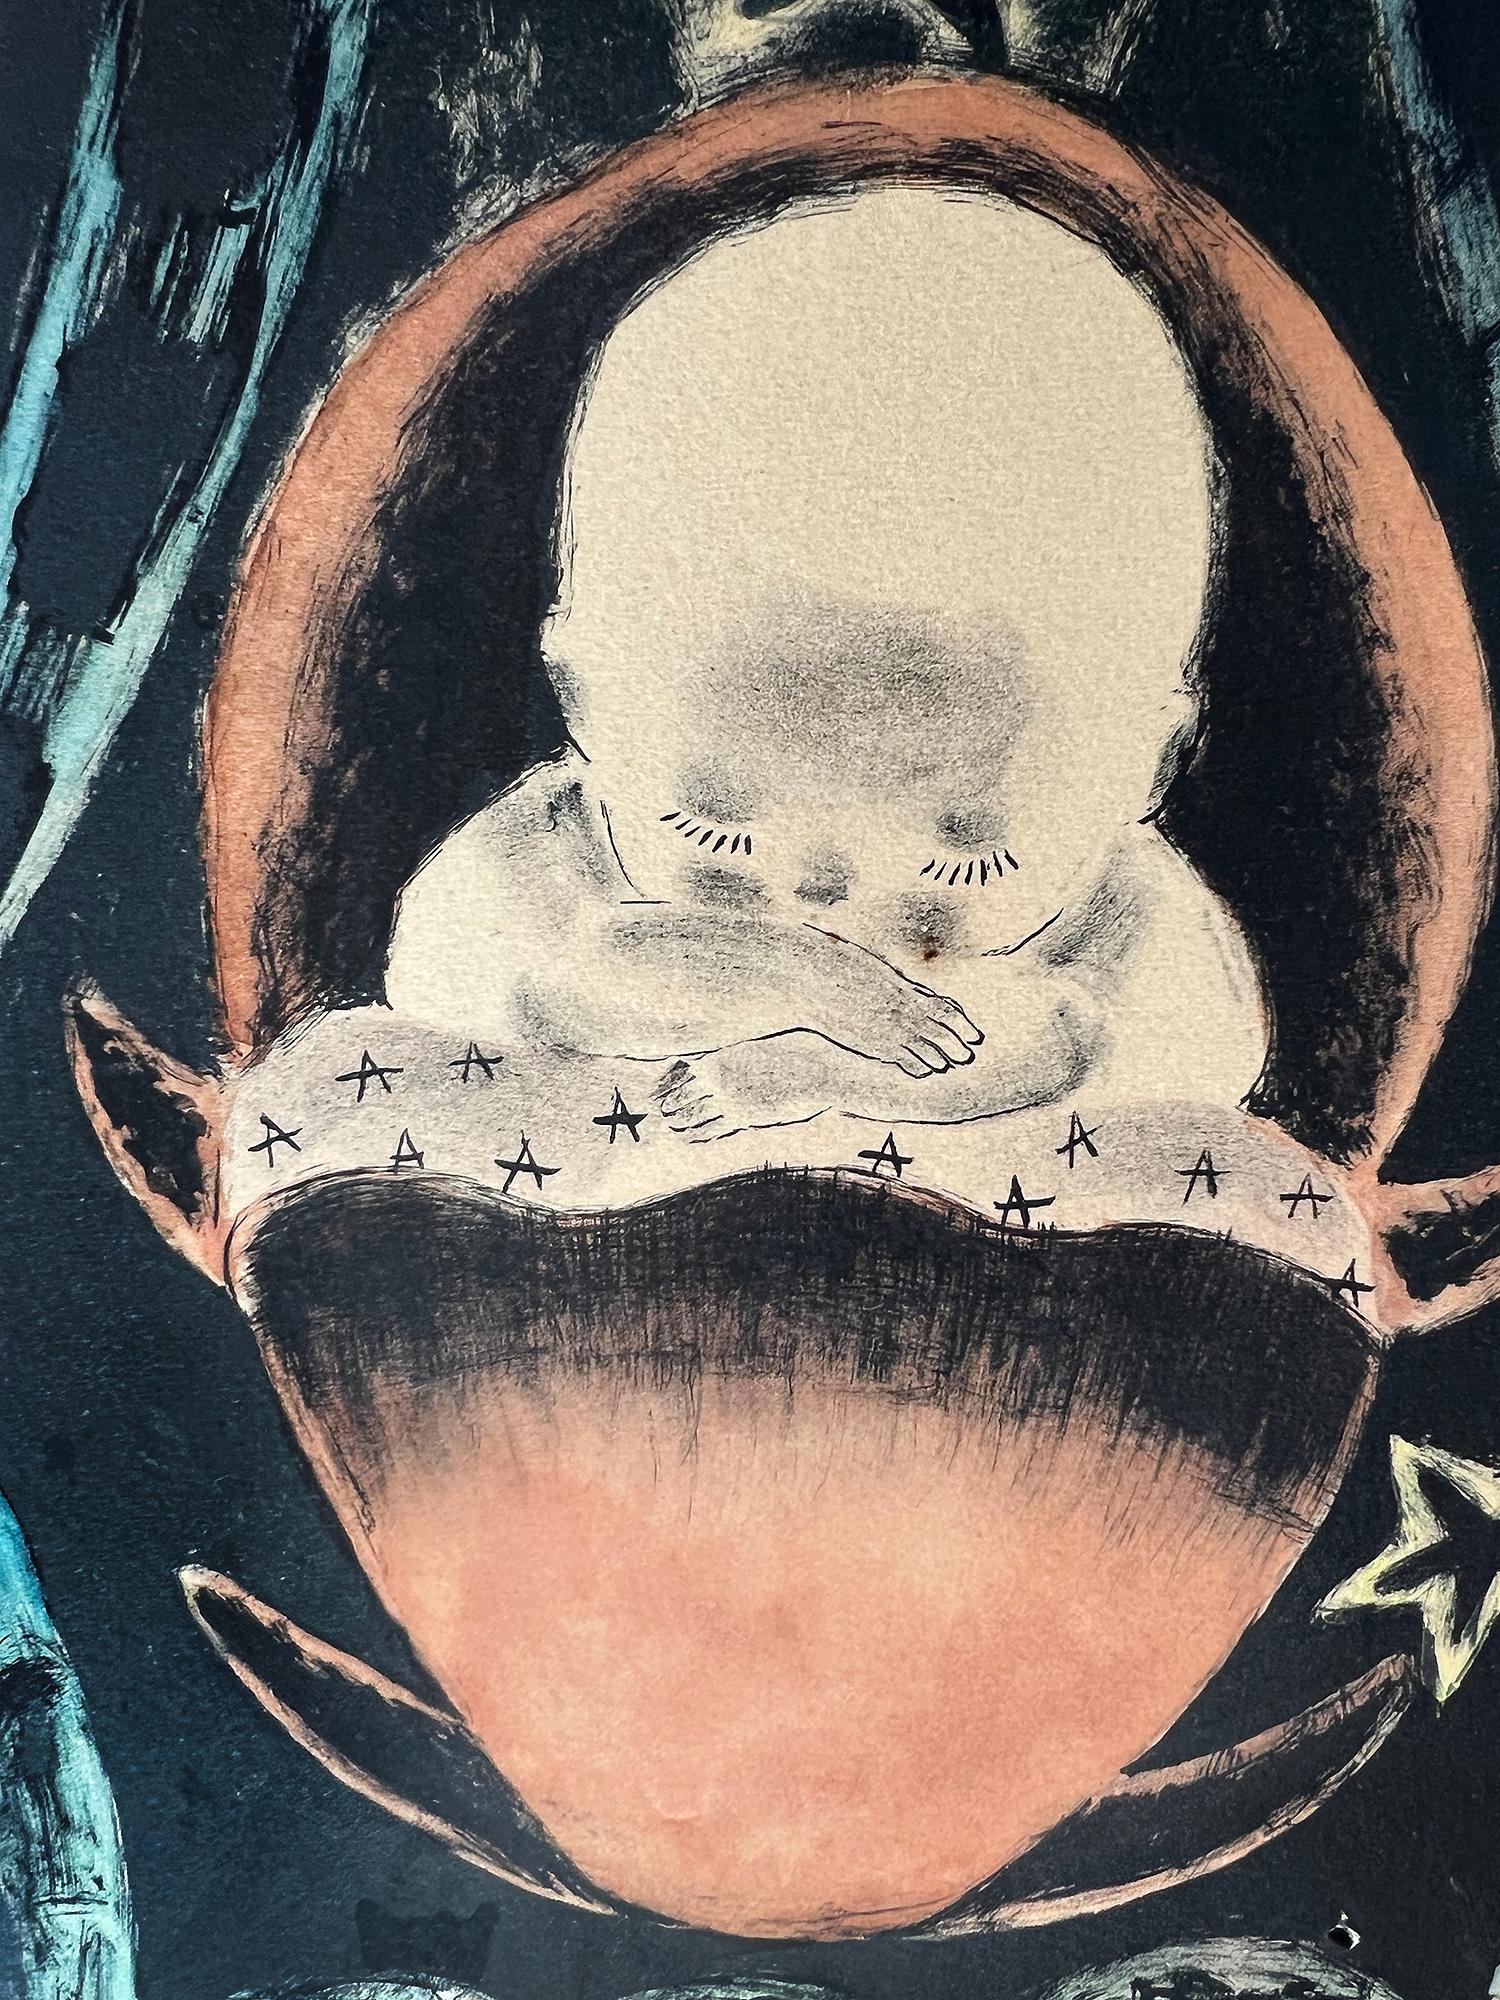 Art Deco - Surreal  Baby Among the Stars in a Theater - Print by Nura Ulreich